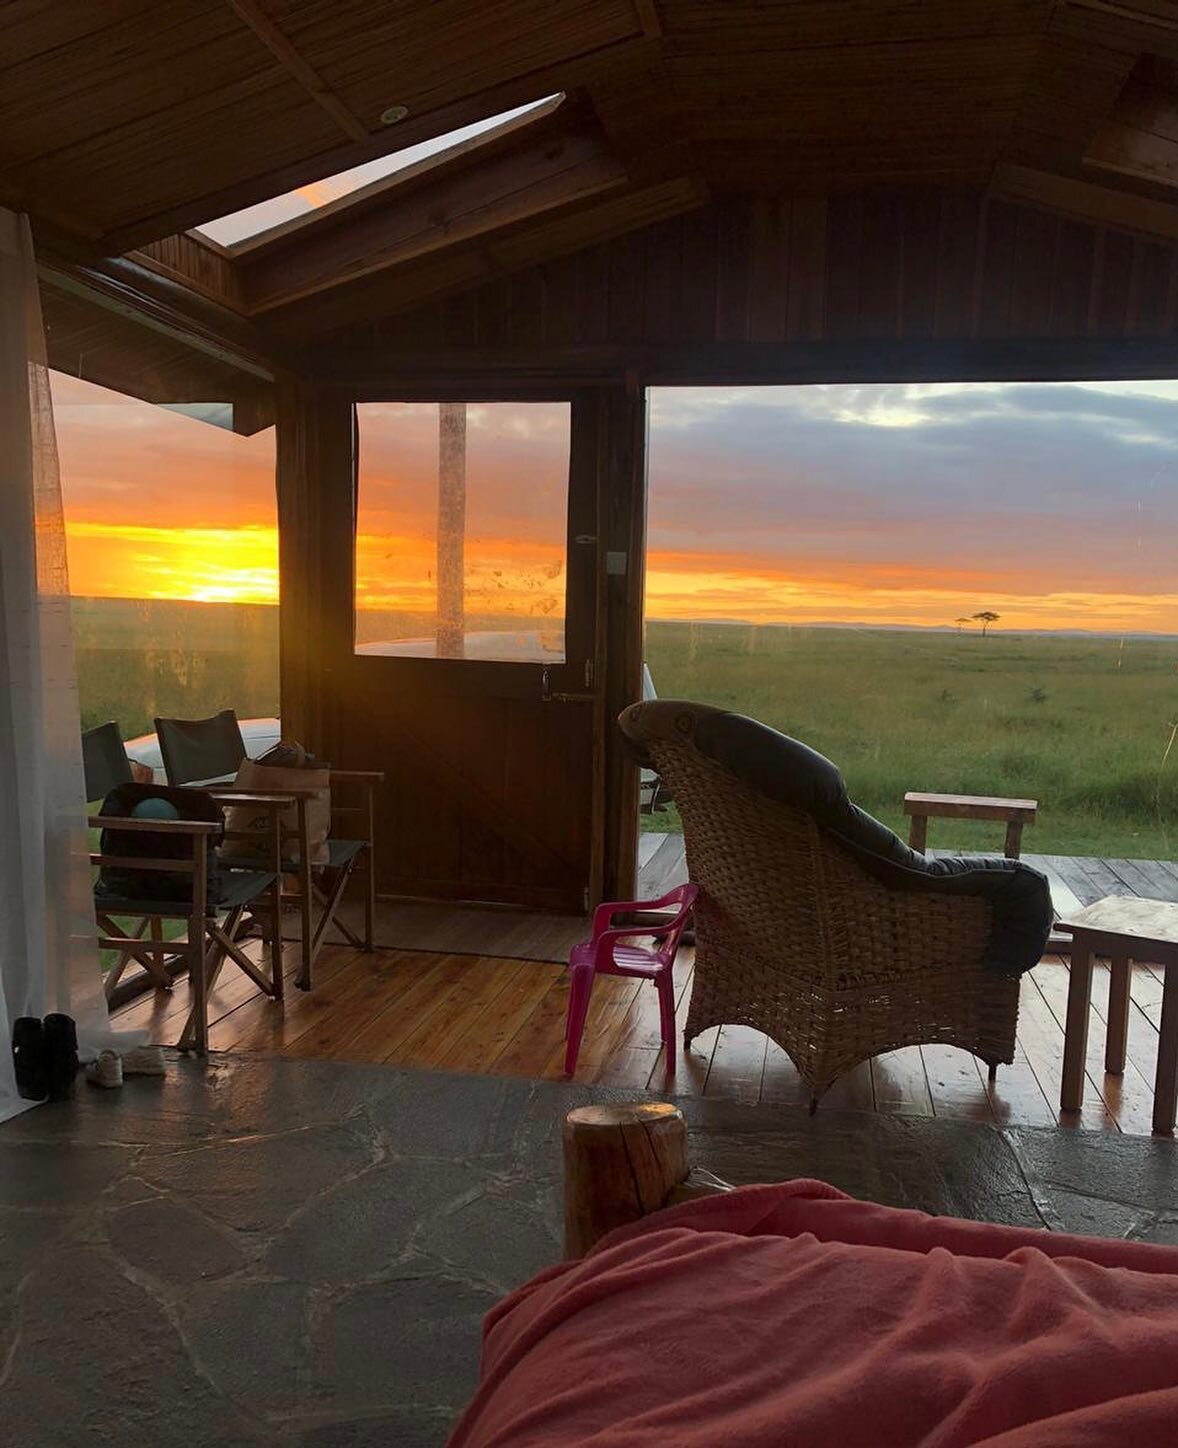 Sunrise view from our Mara cottages 💫. We believe the best way to experience life in the bush is to be as close to nature as possible. There is no other way than to be part of the scene, living and participating in the bush, close to nature and off 